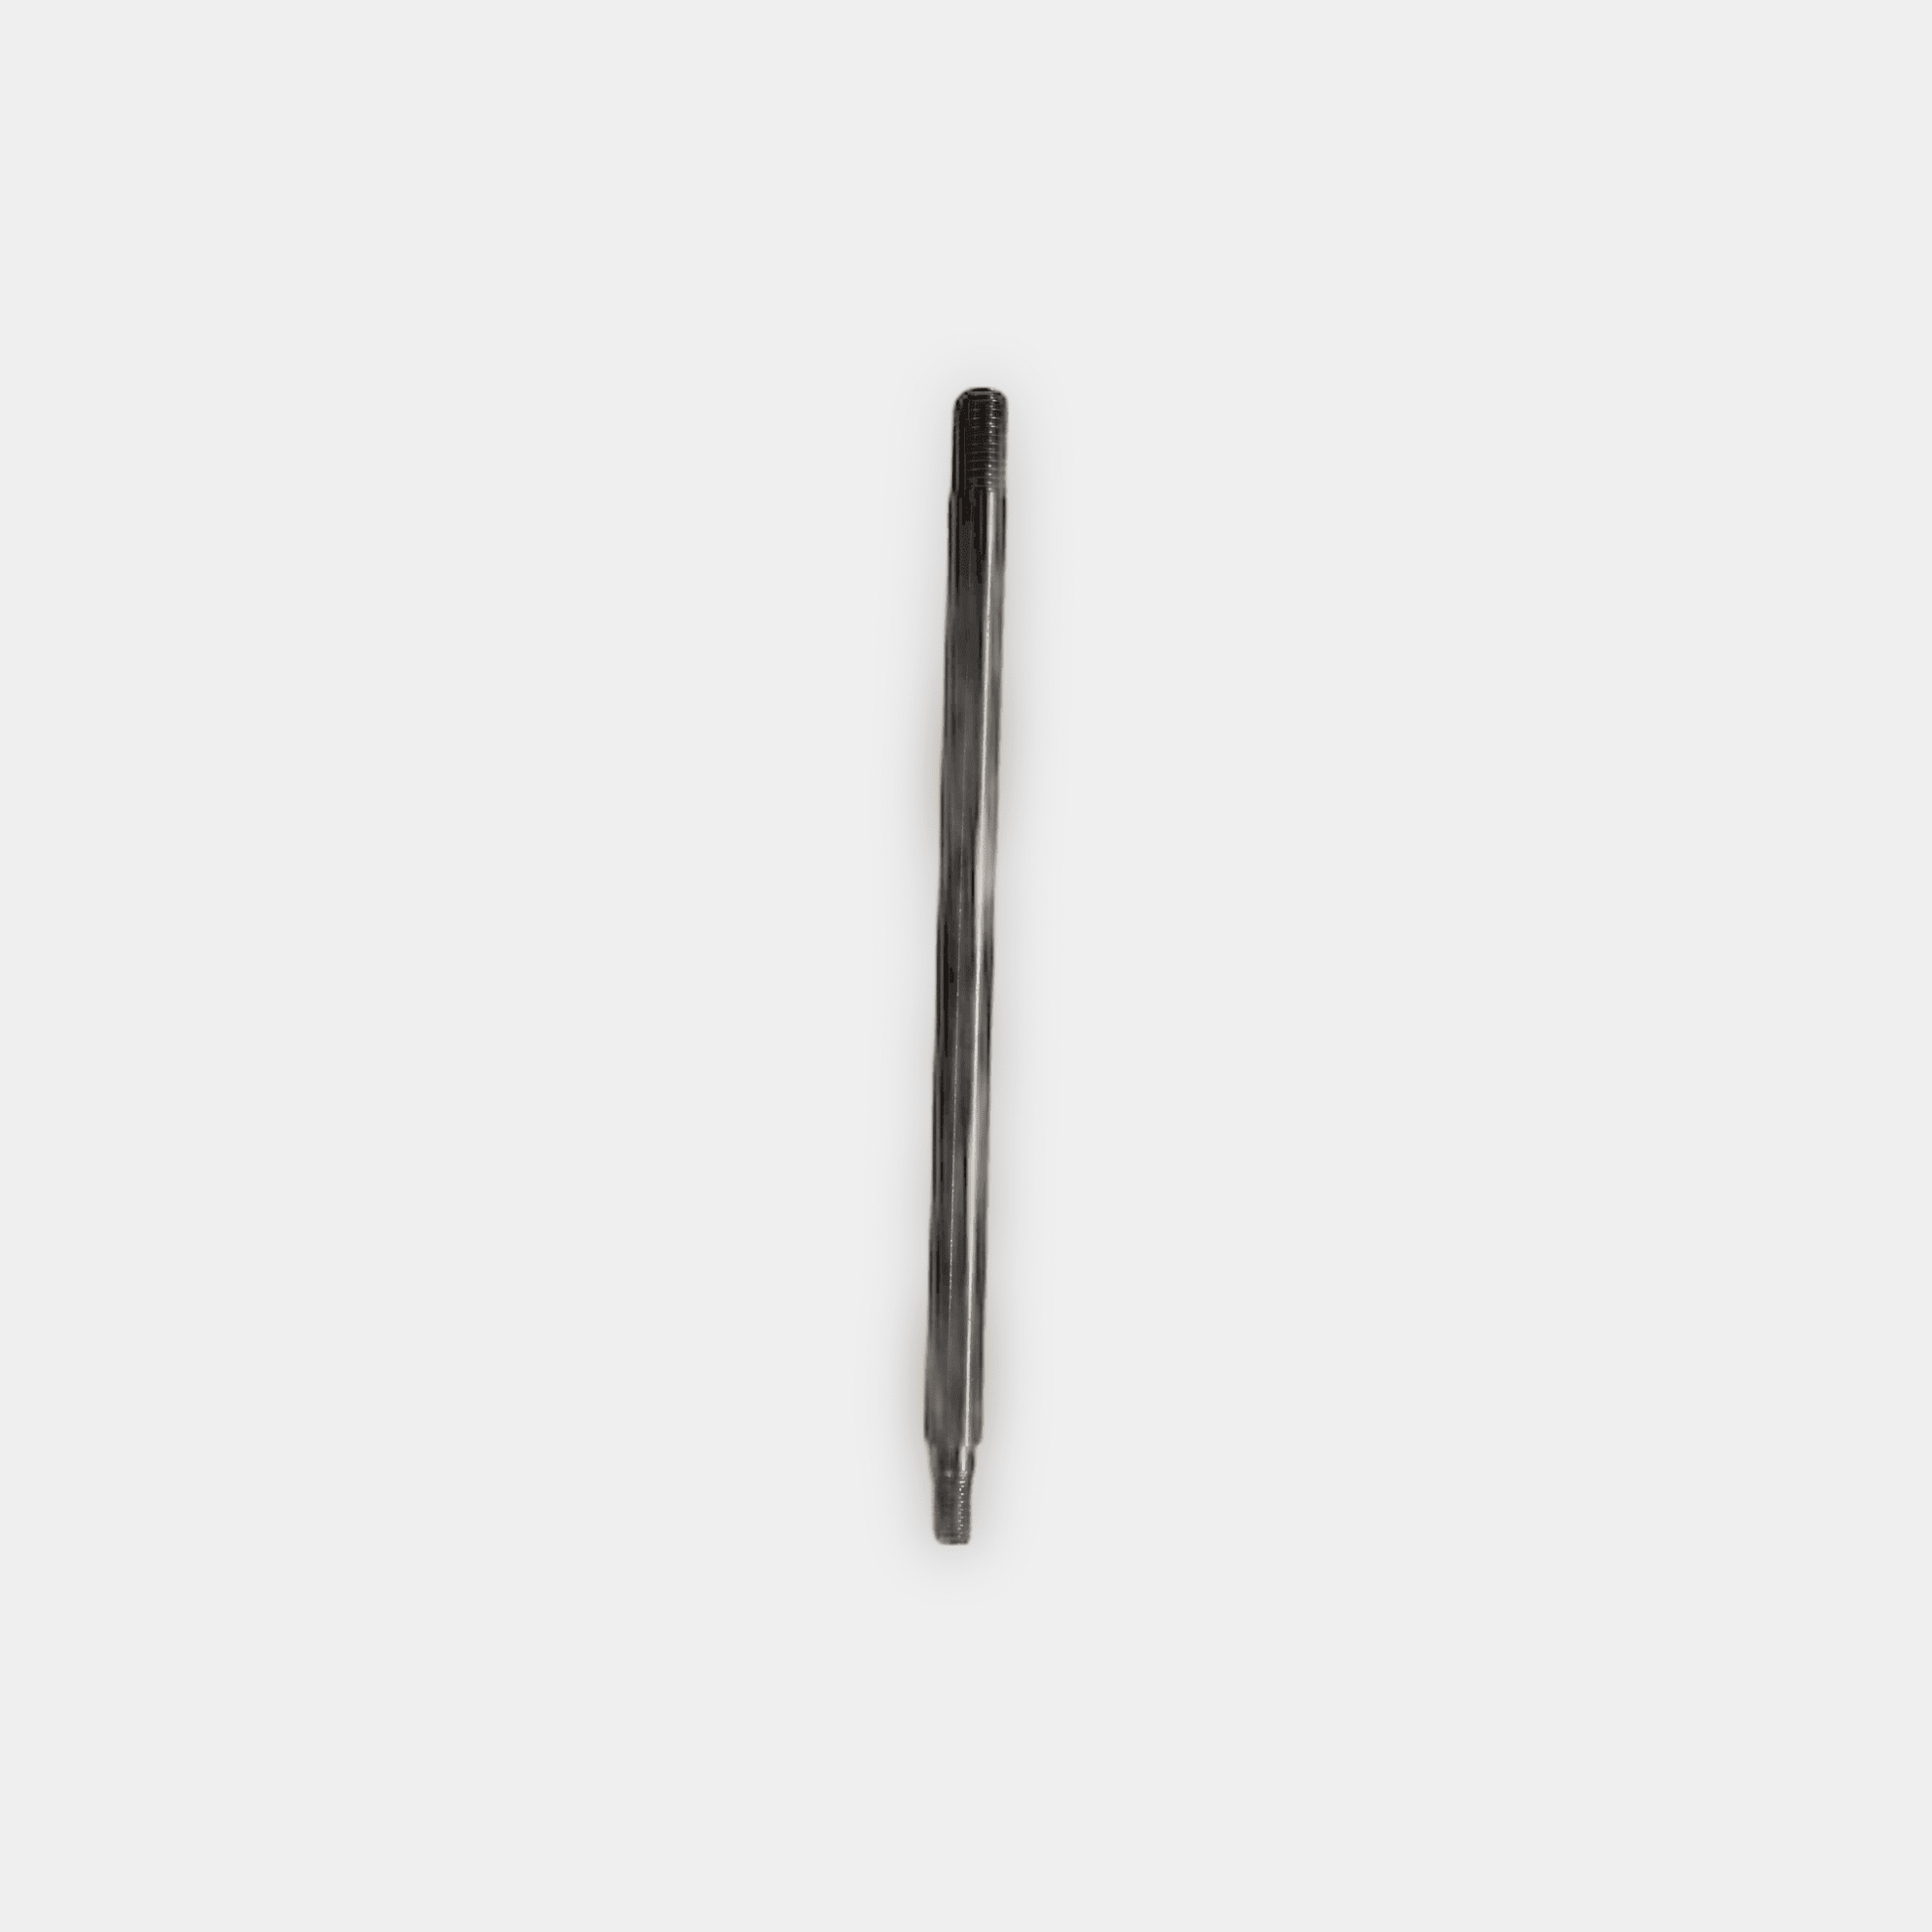 Adapter Rod-- 5/16"-24 to 6mm